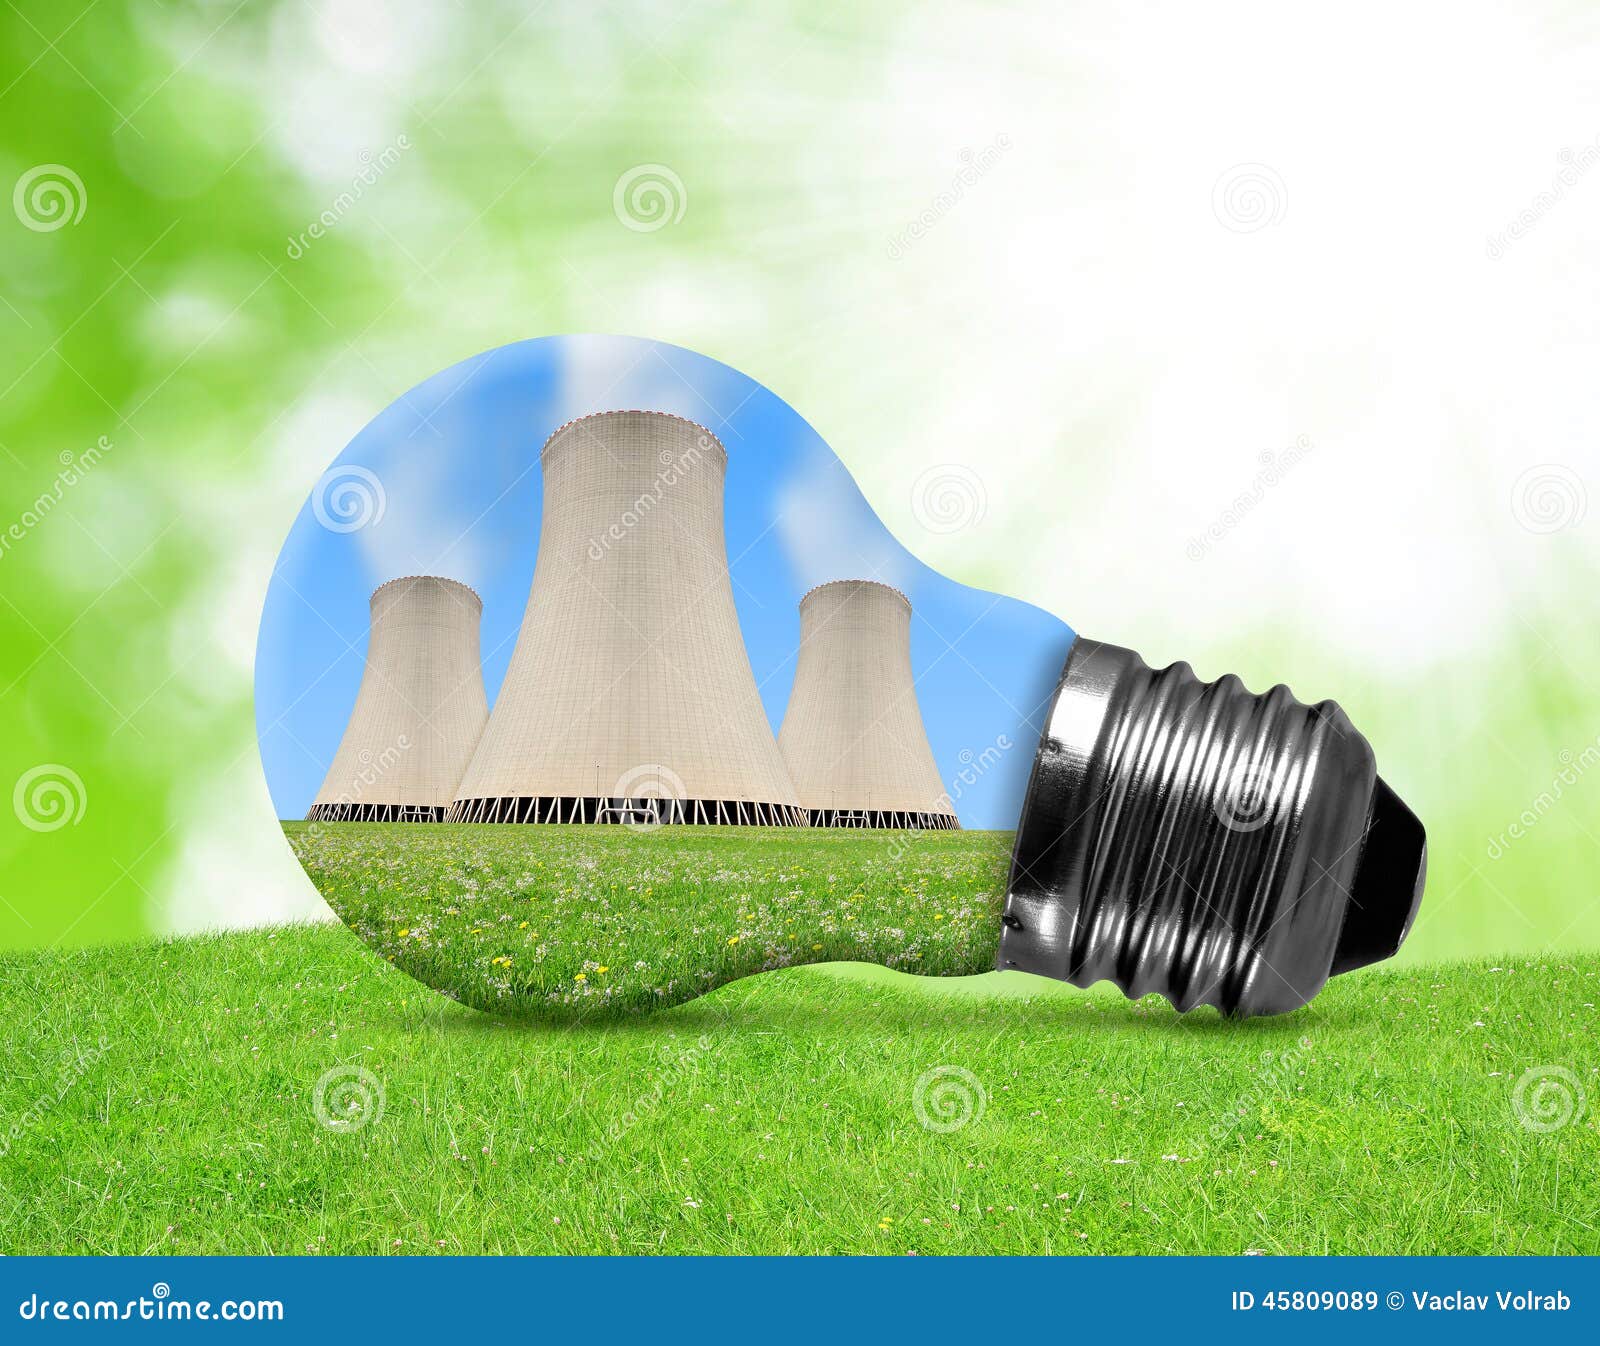 clipart of nuclear power plant - photo #39